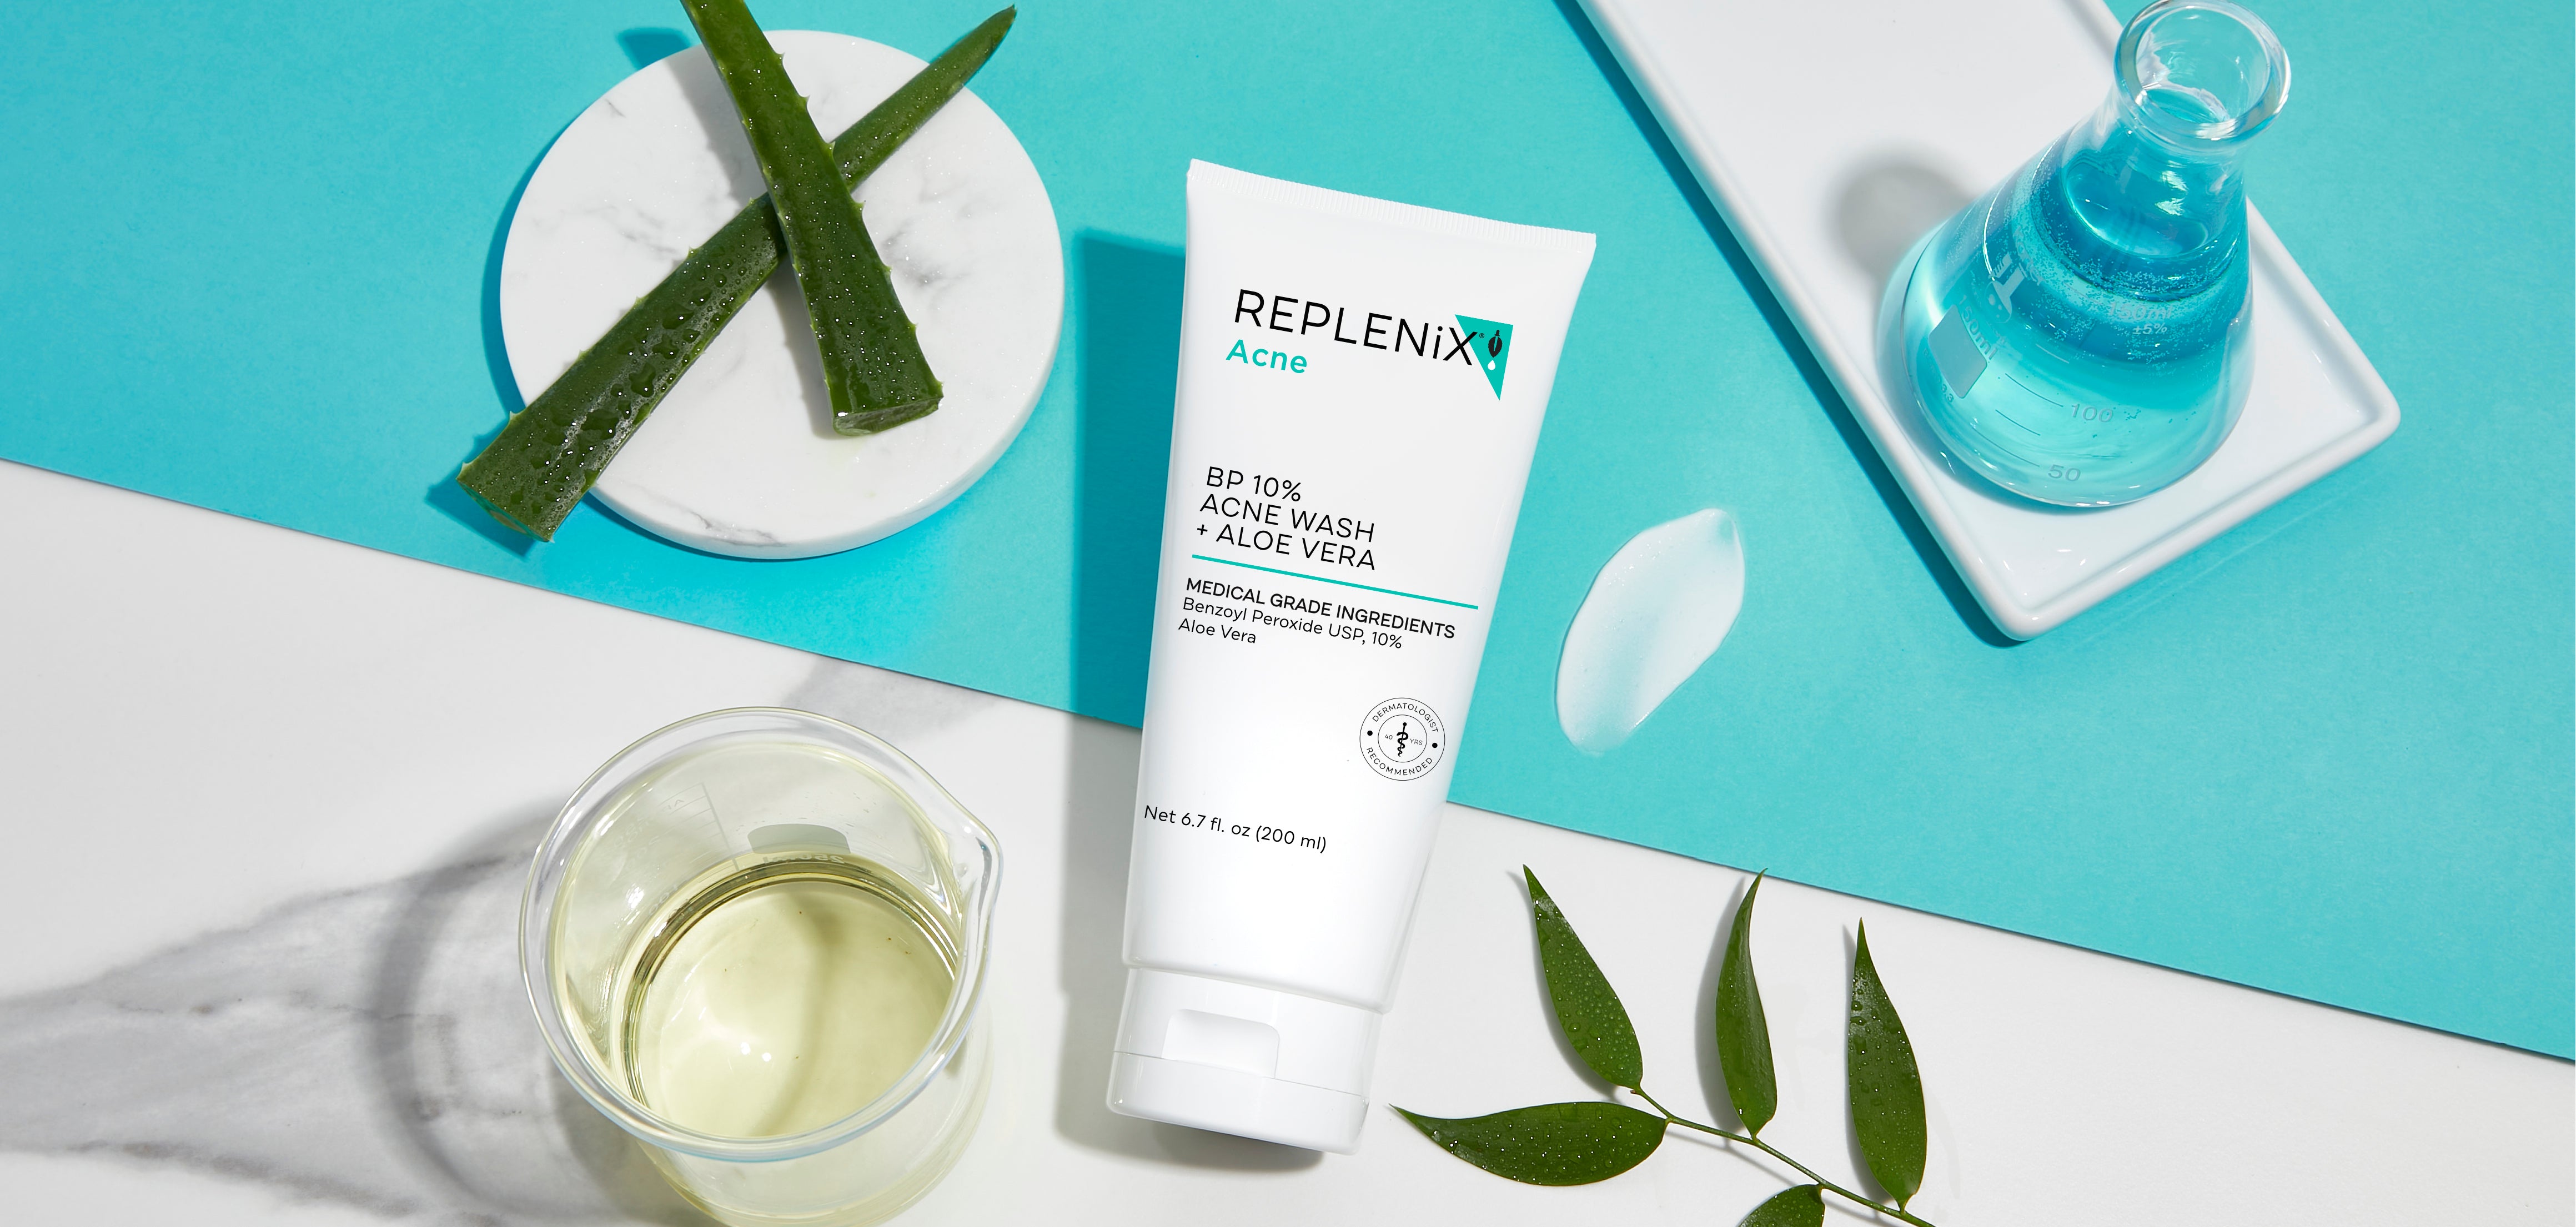 Medical-grade dermatologist recommended cleansers by Replenix